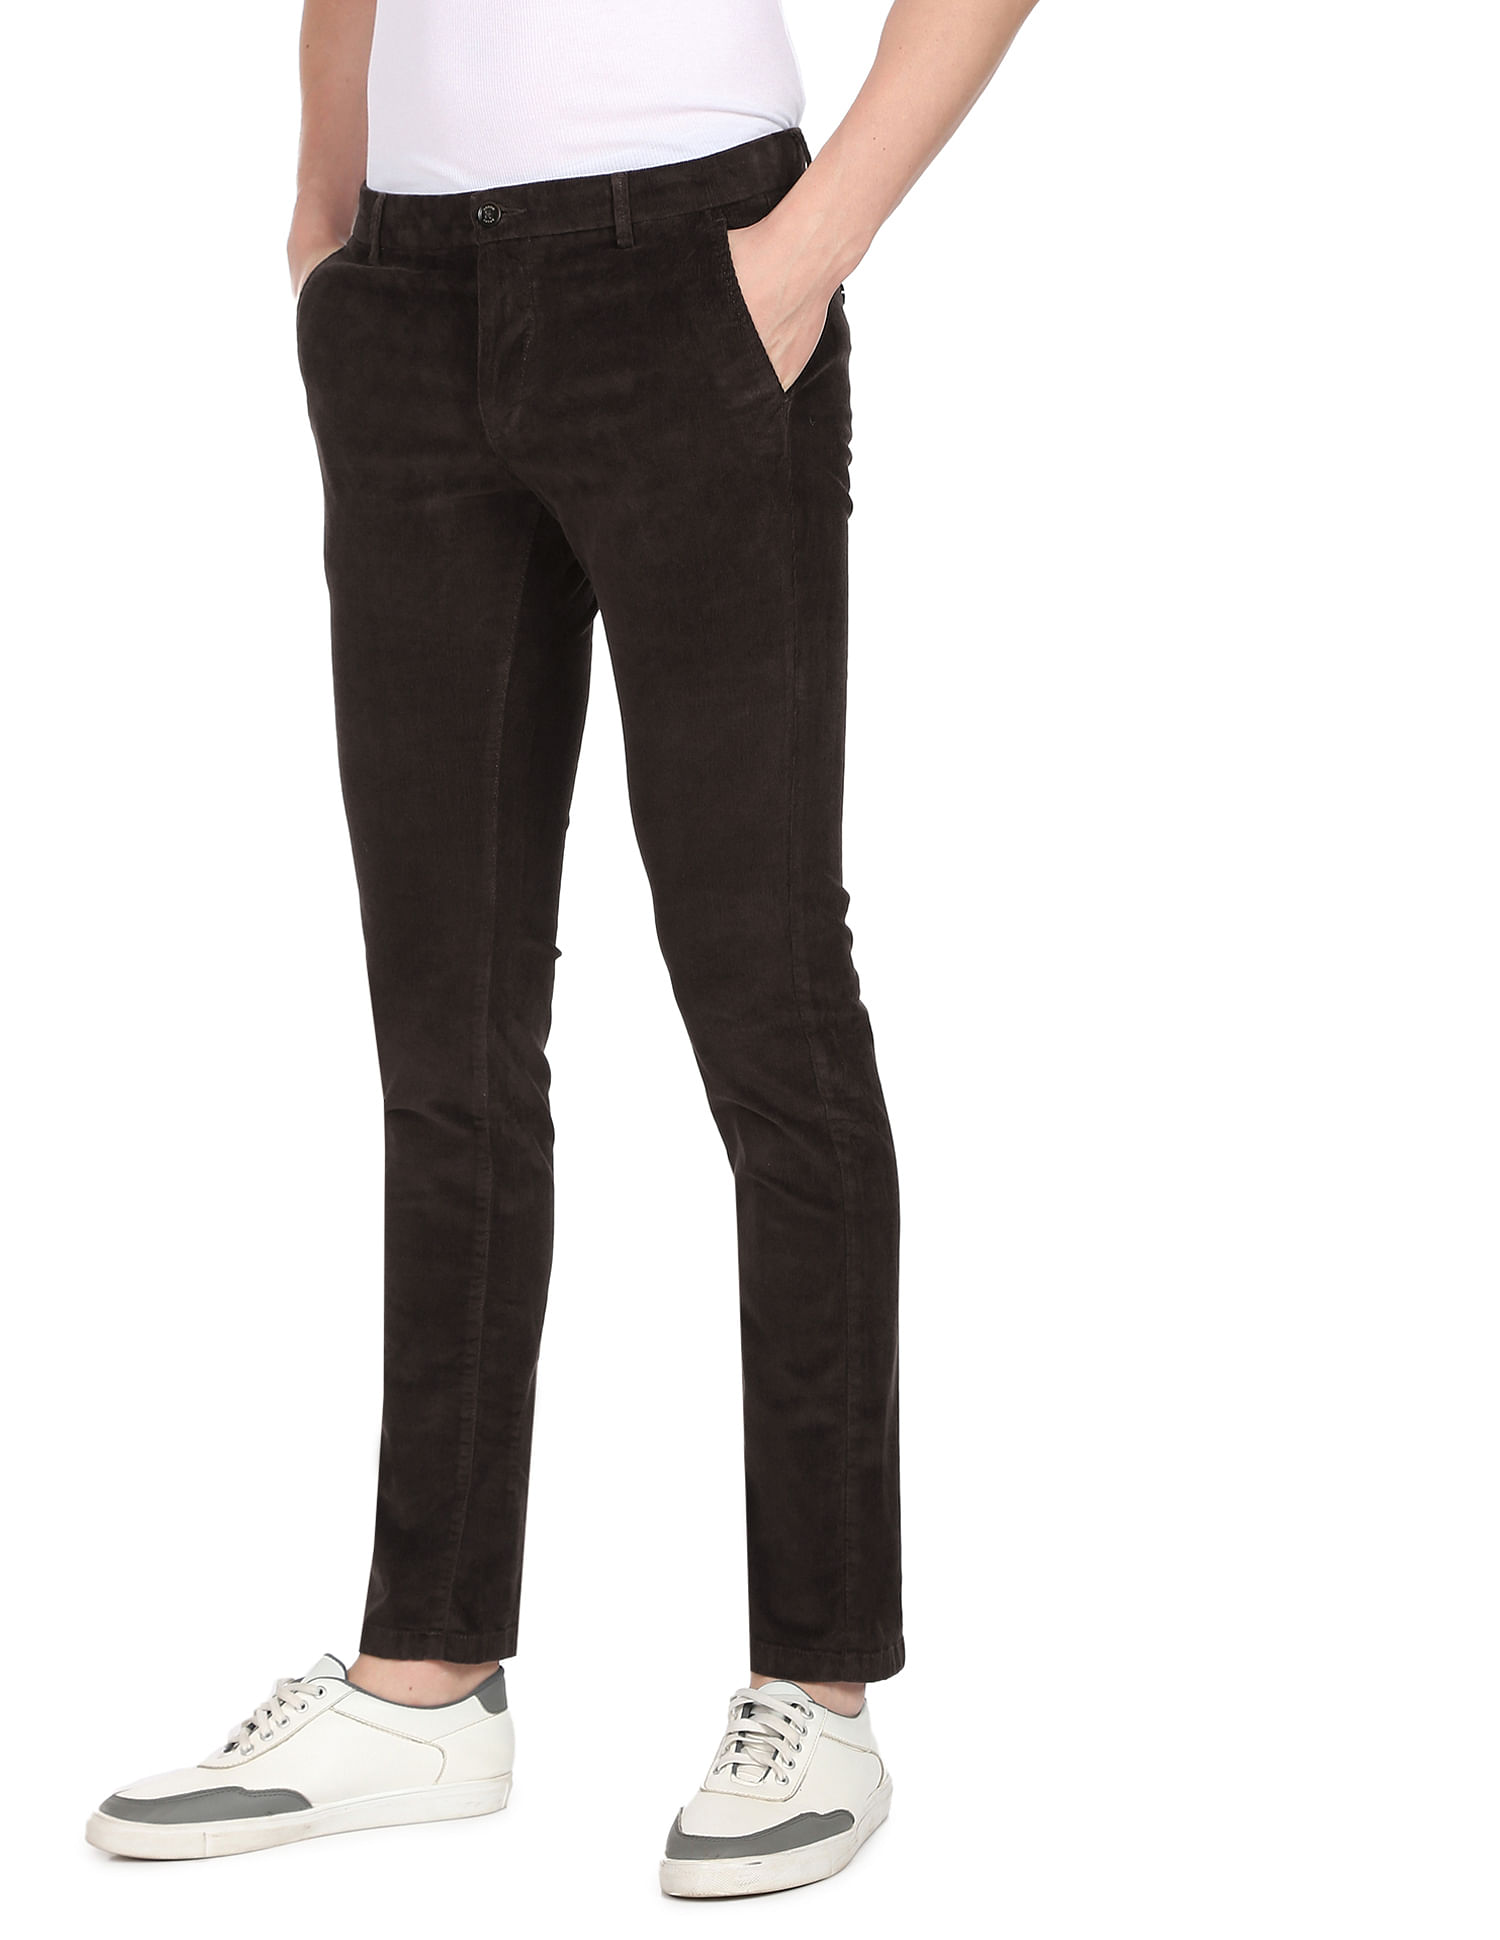 Buy Wine Red Trousers  Pants for Men by BASICS Online  Ajiocom